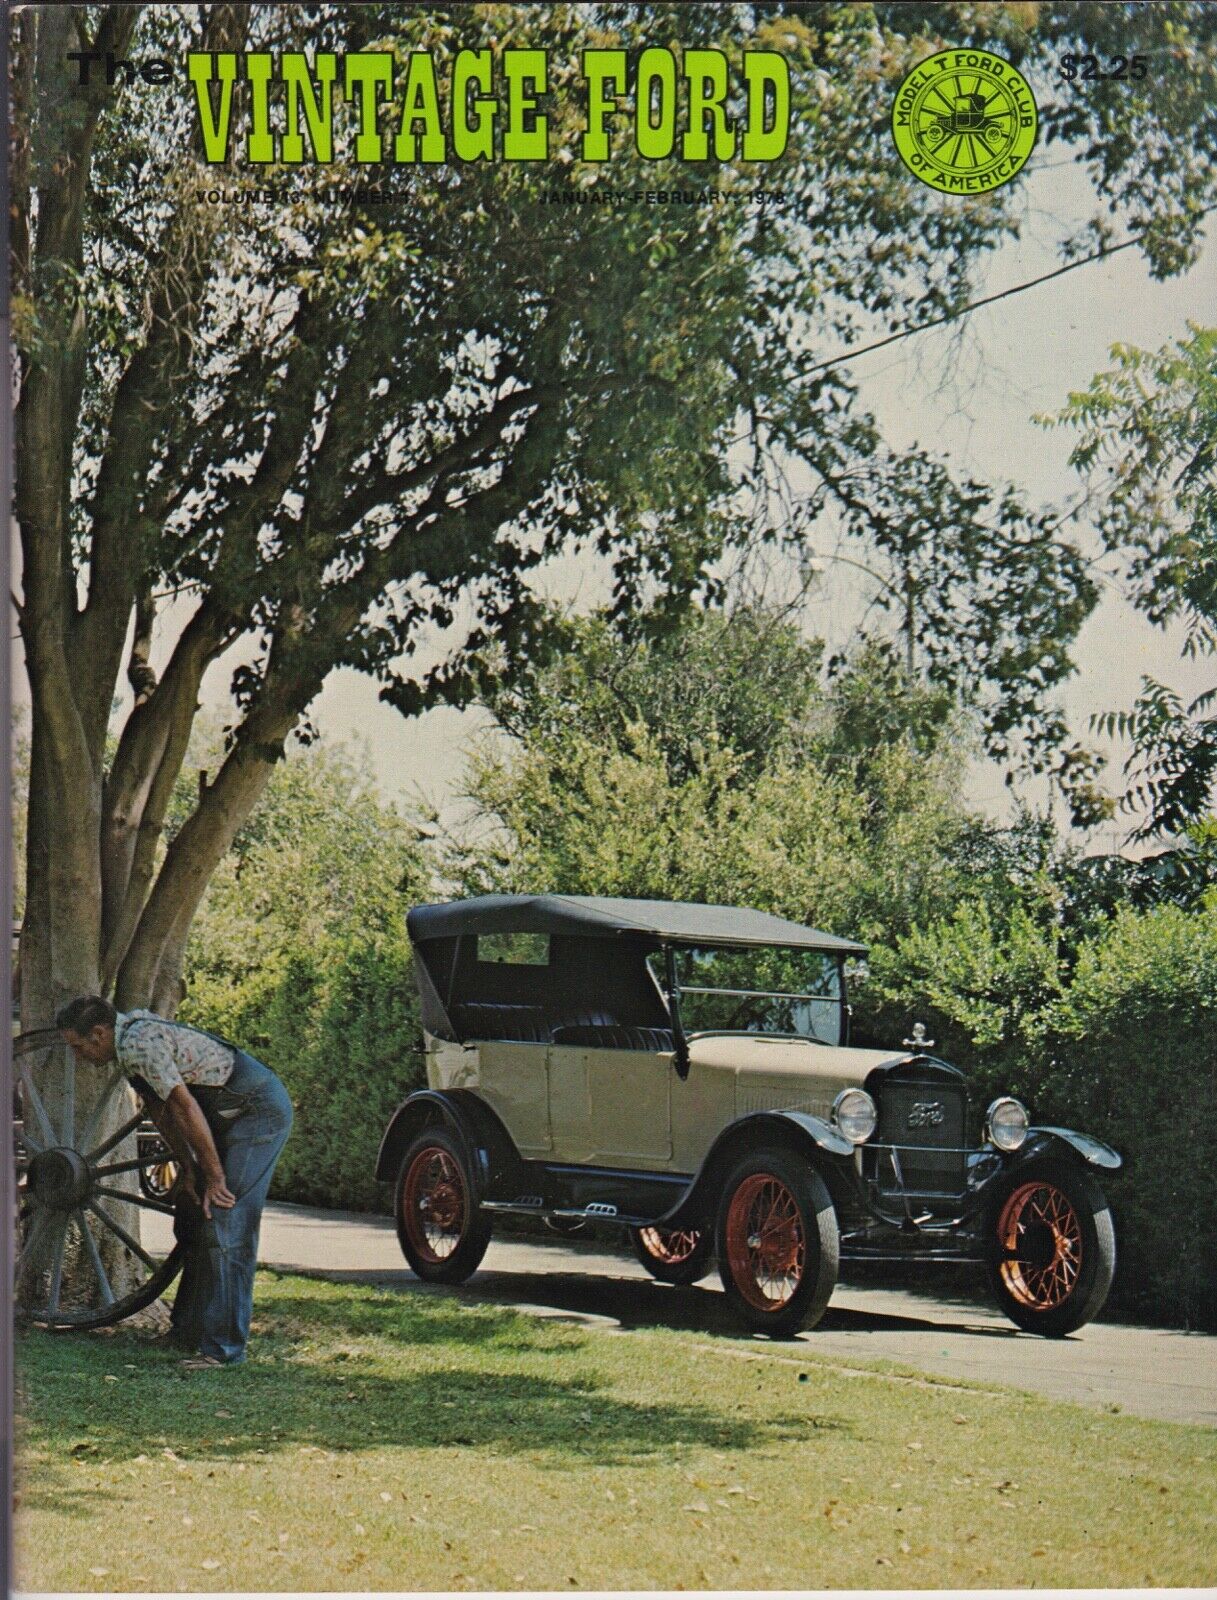 1927 TOURING - THE VINTAGE FORD MAGAZINE - SAN FERNANDO VALLEY CHAPTER